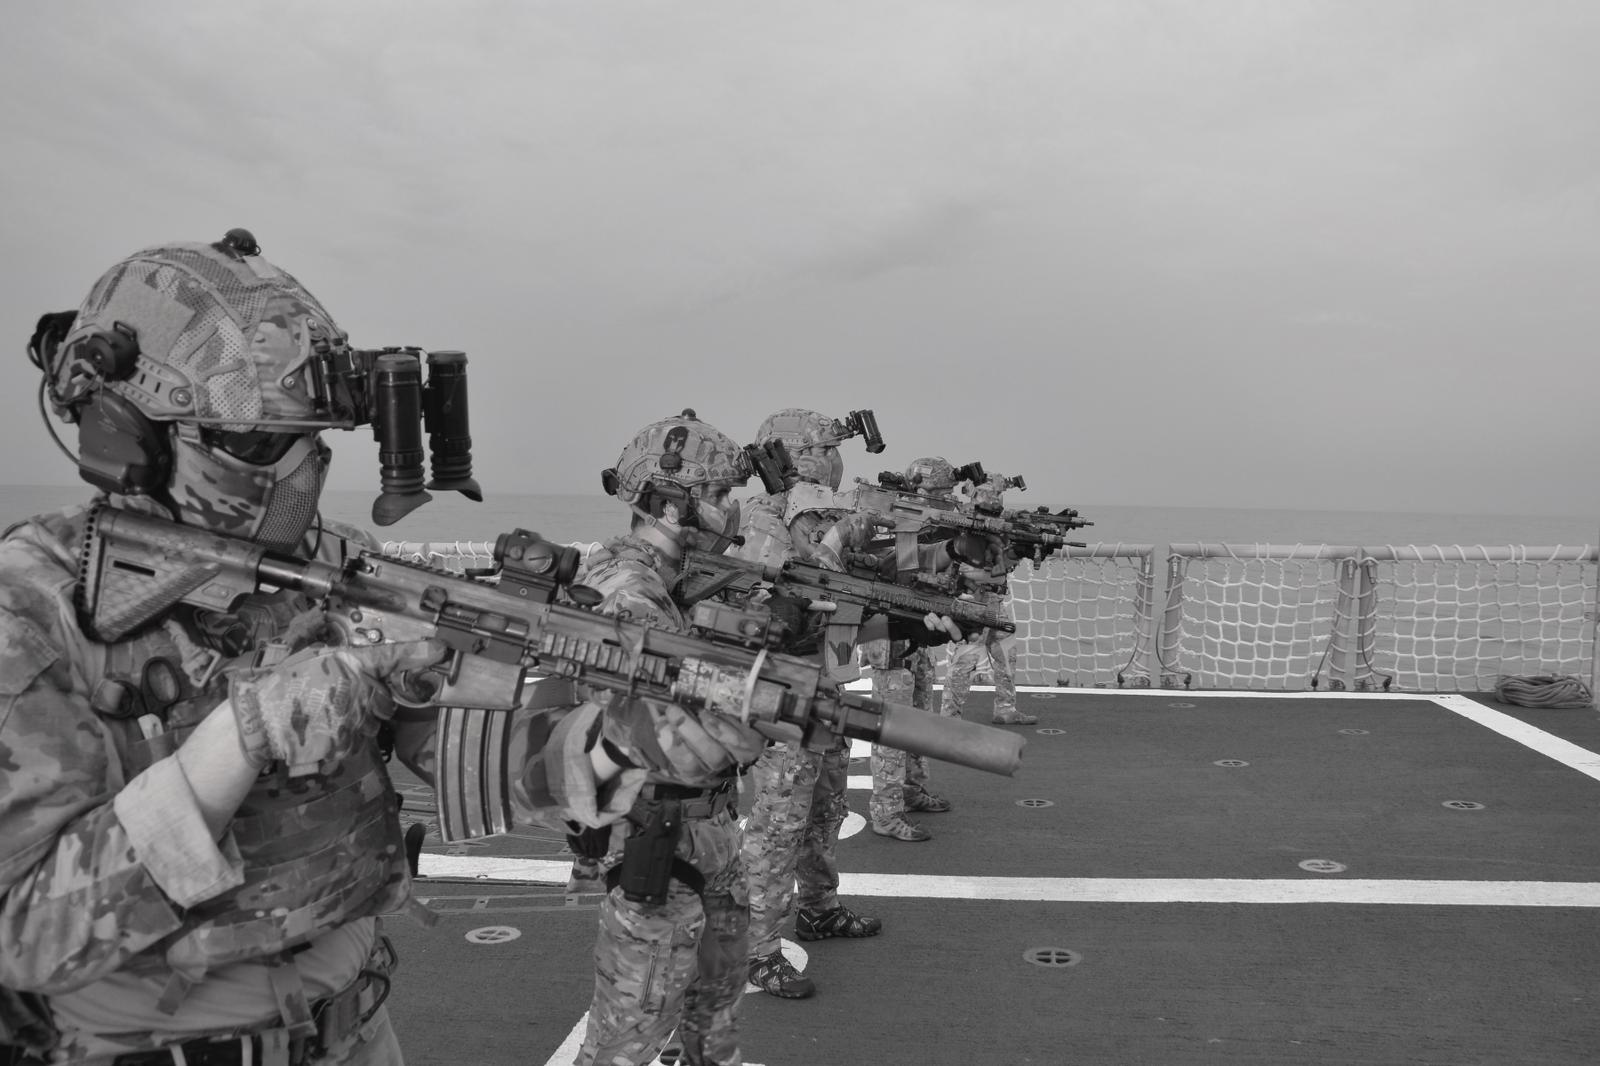 The Special Naval Warfare Force Team of Marine Infantry contributes to security in the Somali coasts